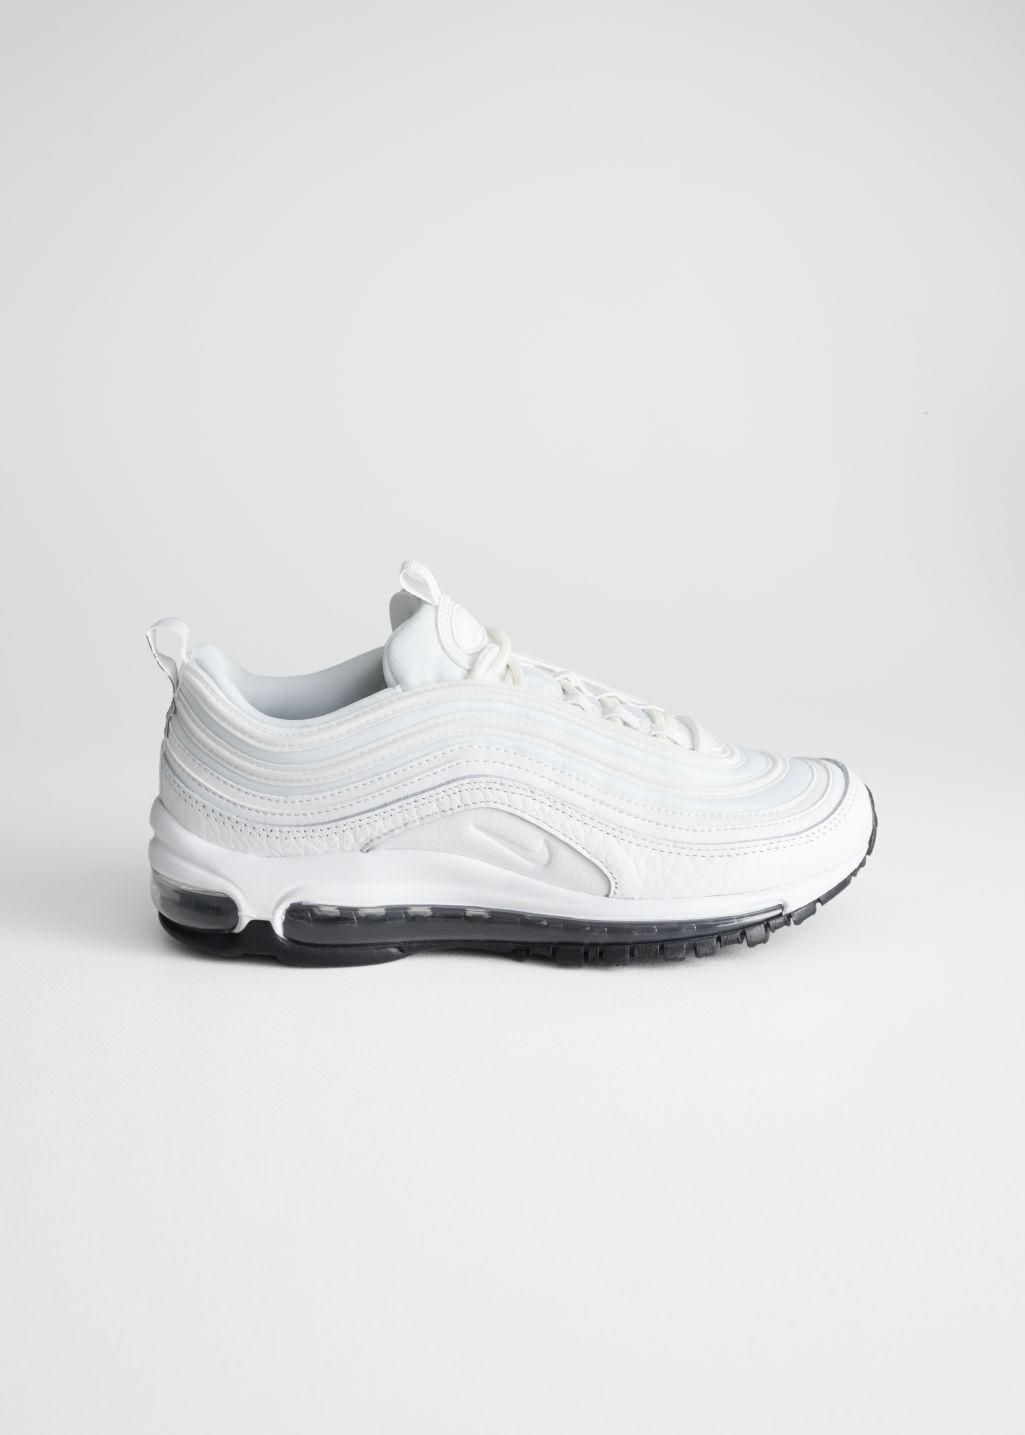 & Other Stories Leather Nike Air Max 97 Lea in White - Lyst